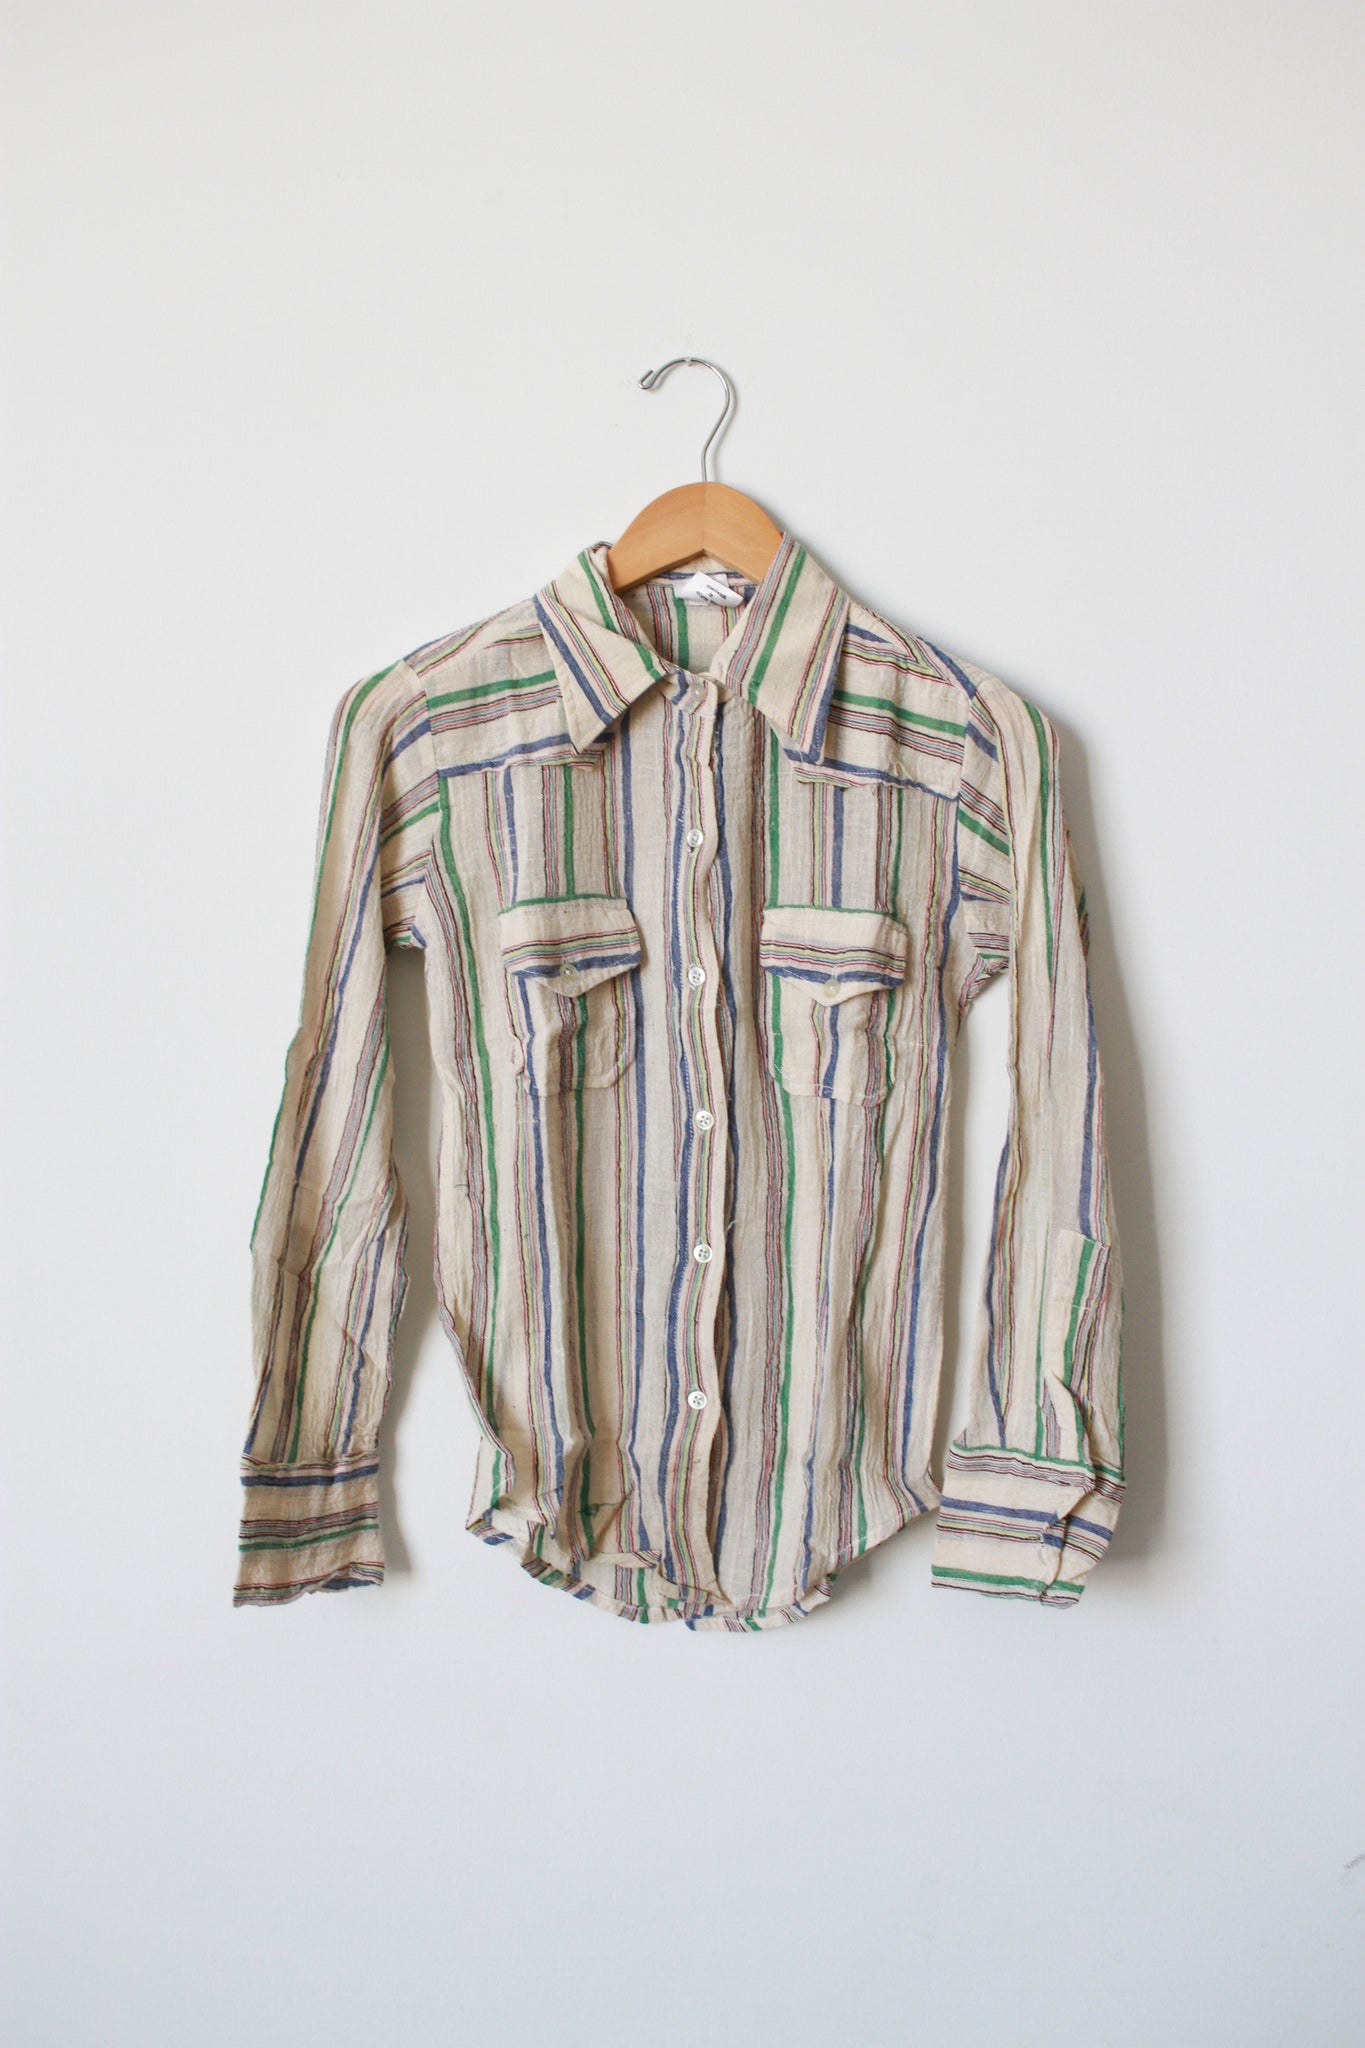 1970s Deadstock Indian Cotton Madras Button Up